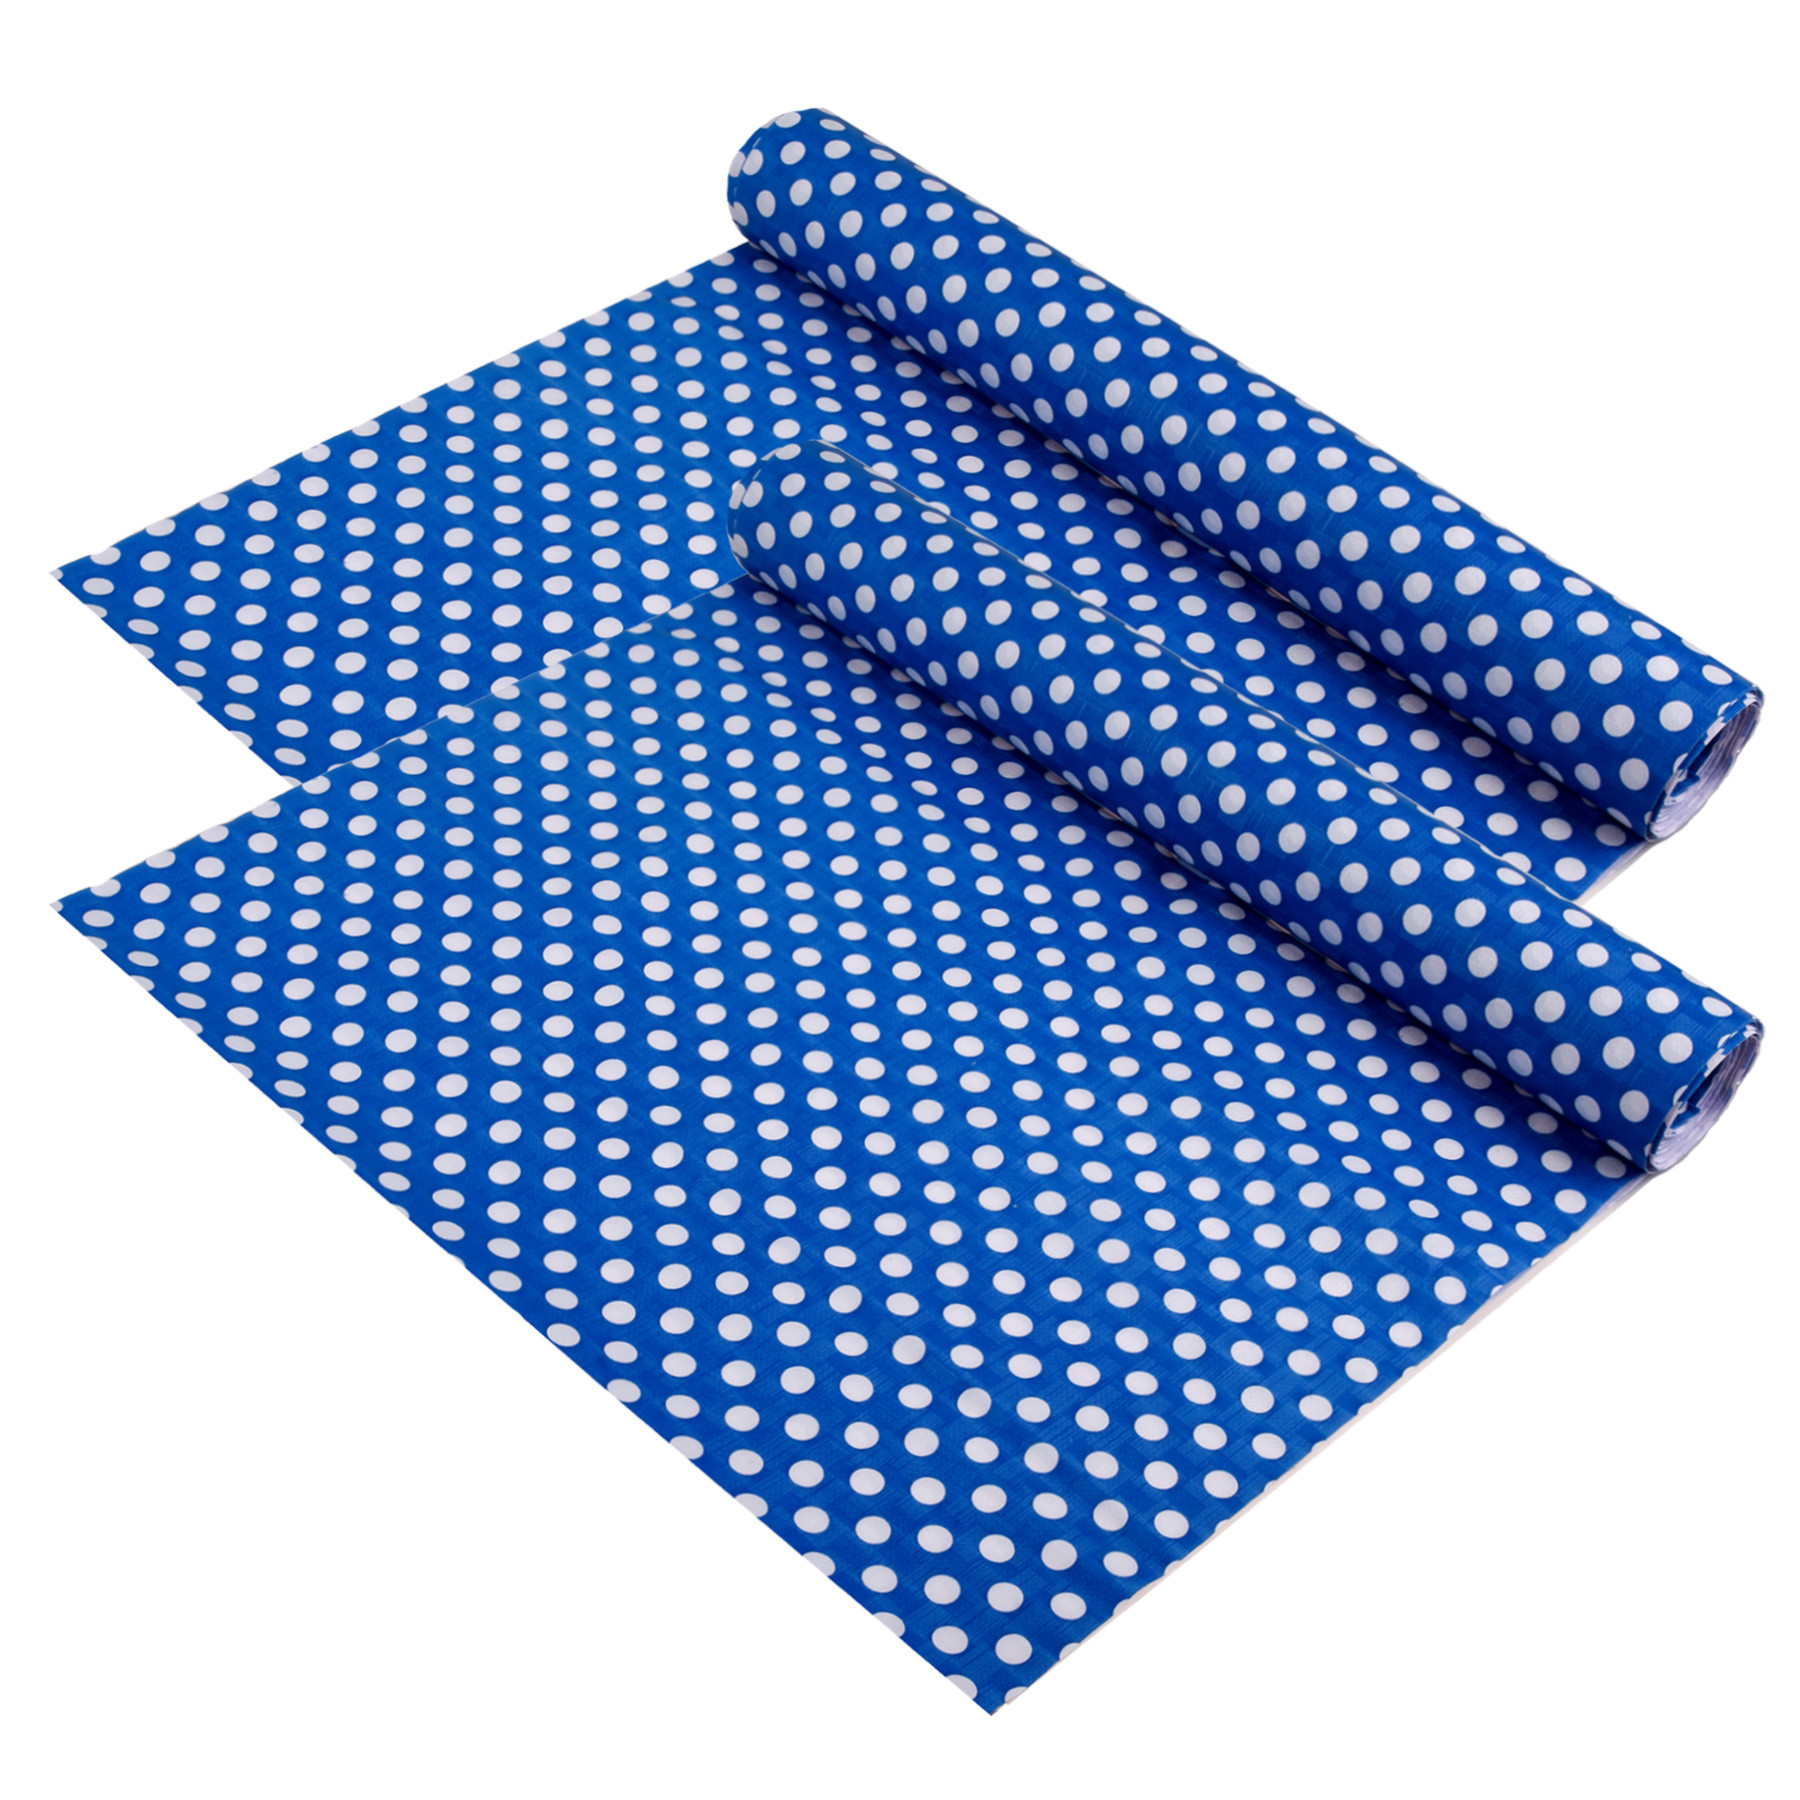 Kuber Industries Shelf Liner | Kitchen Cabinet Shelf Protector | Kitchen Liners for Cabinets and Drawers | Drawer Liner Mat | Dot-Print Shelf Liner Cabinet Mat | 3 MTR | Royal Blue